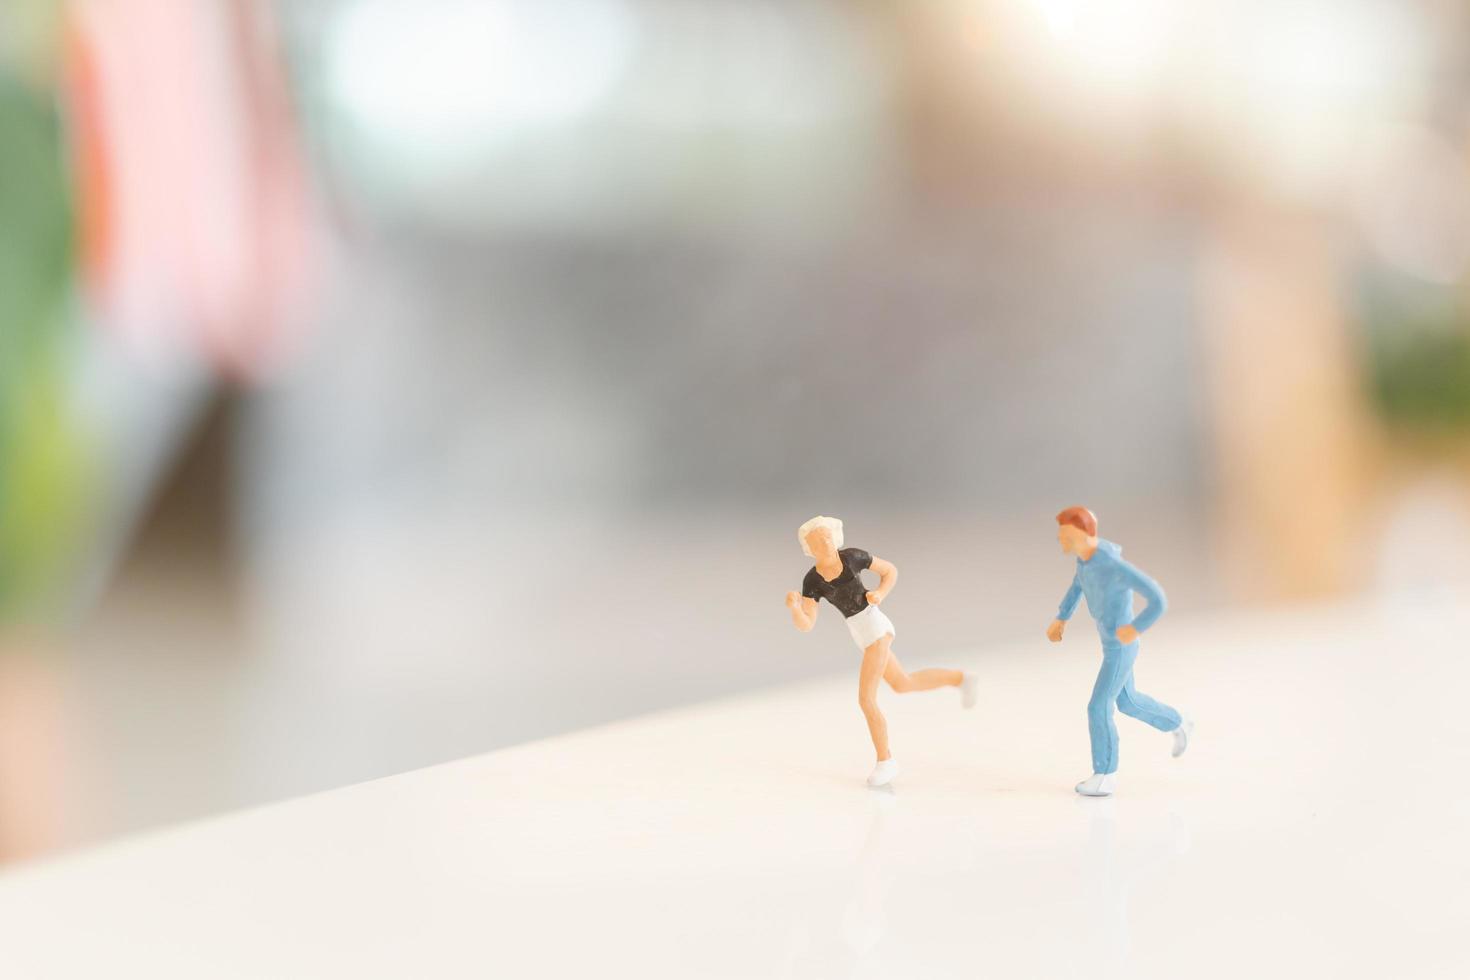 Miniature people running, health and sports concept photo